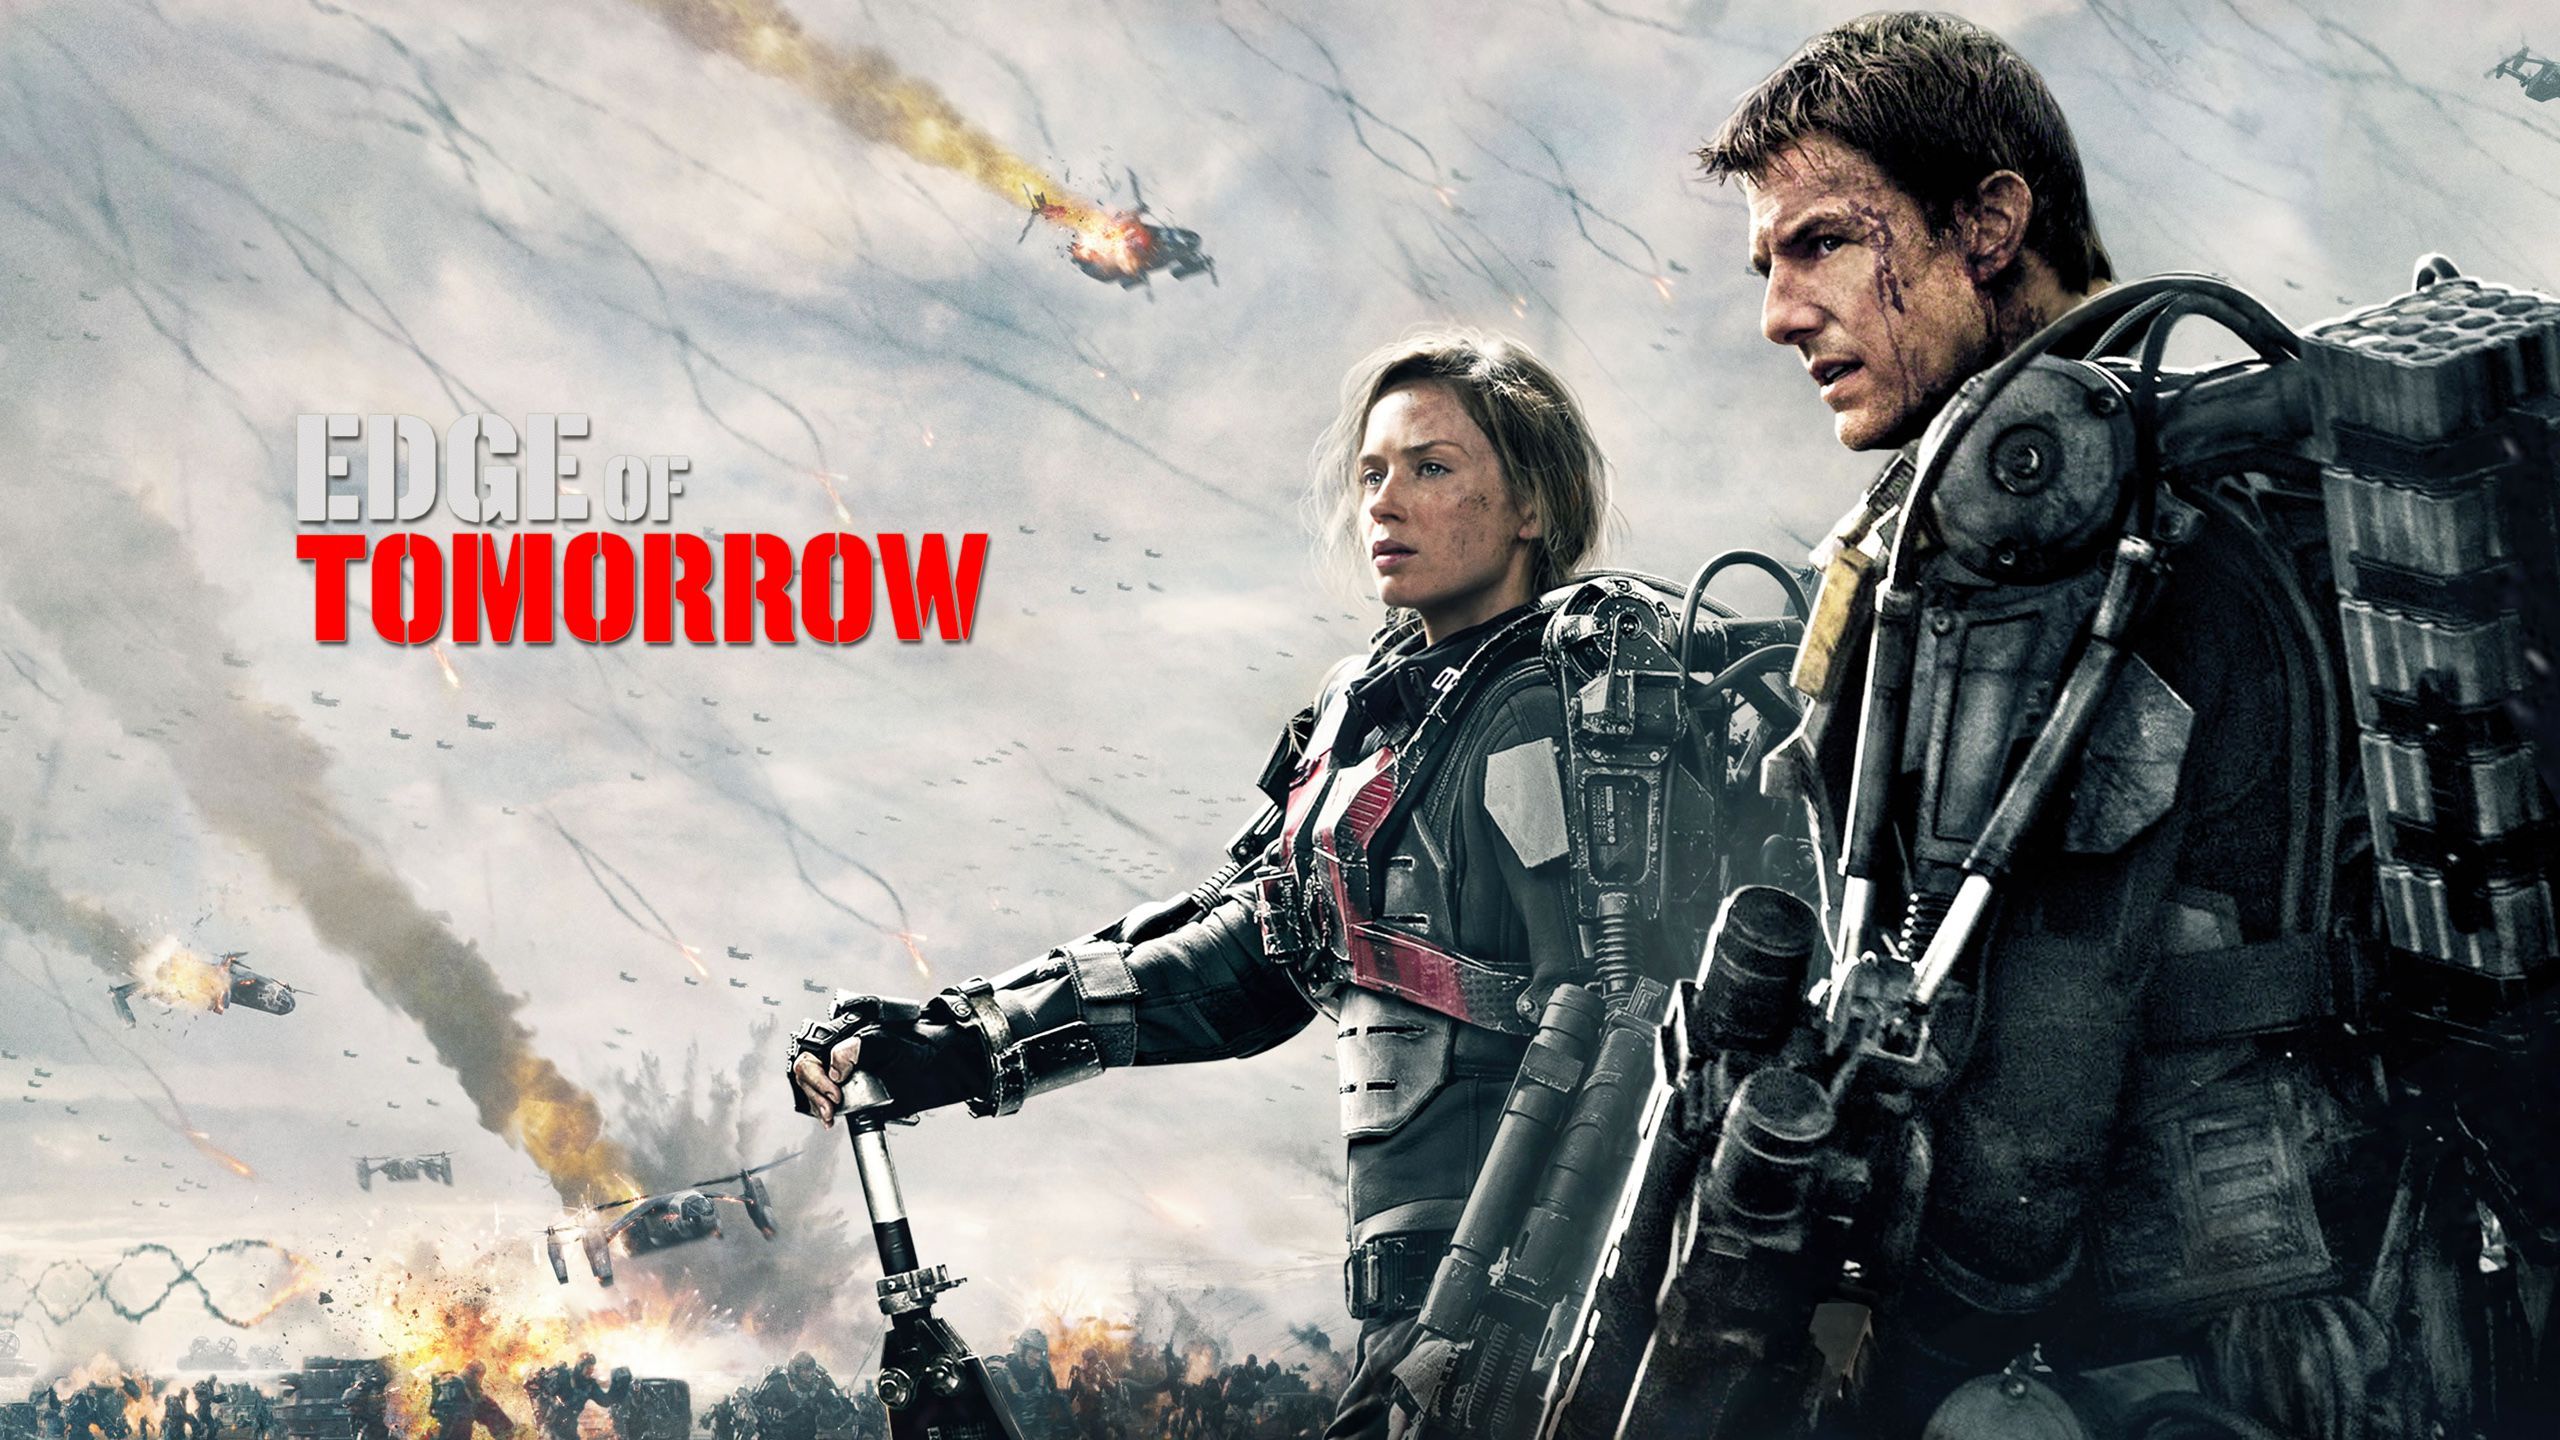 Science Fiction Film Edge Of Tomorrow Image For Wallpaper